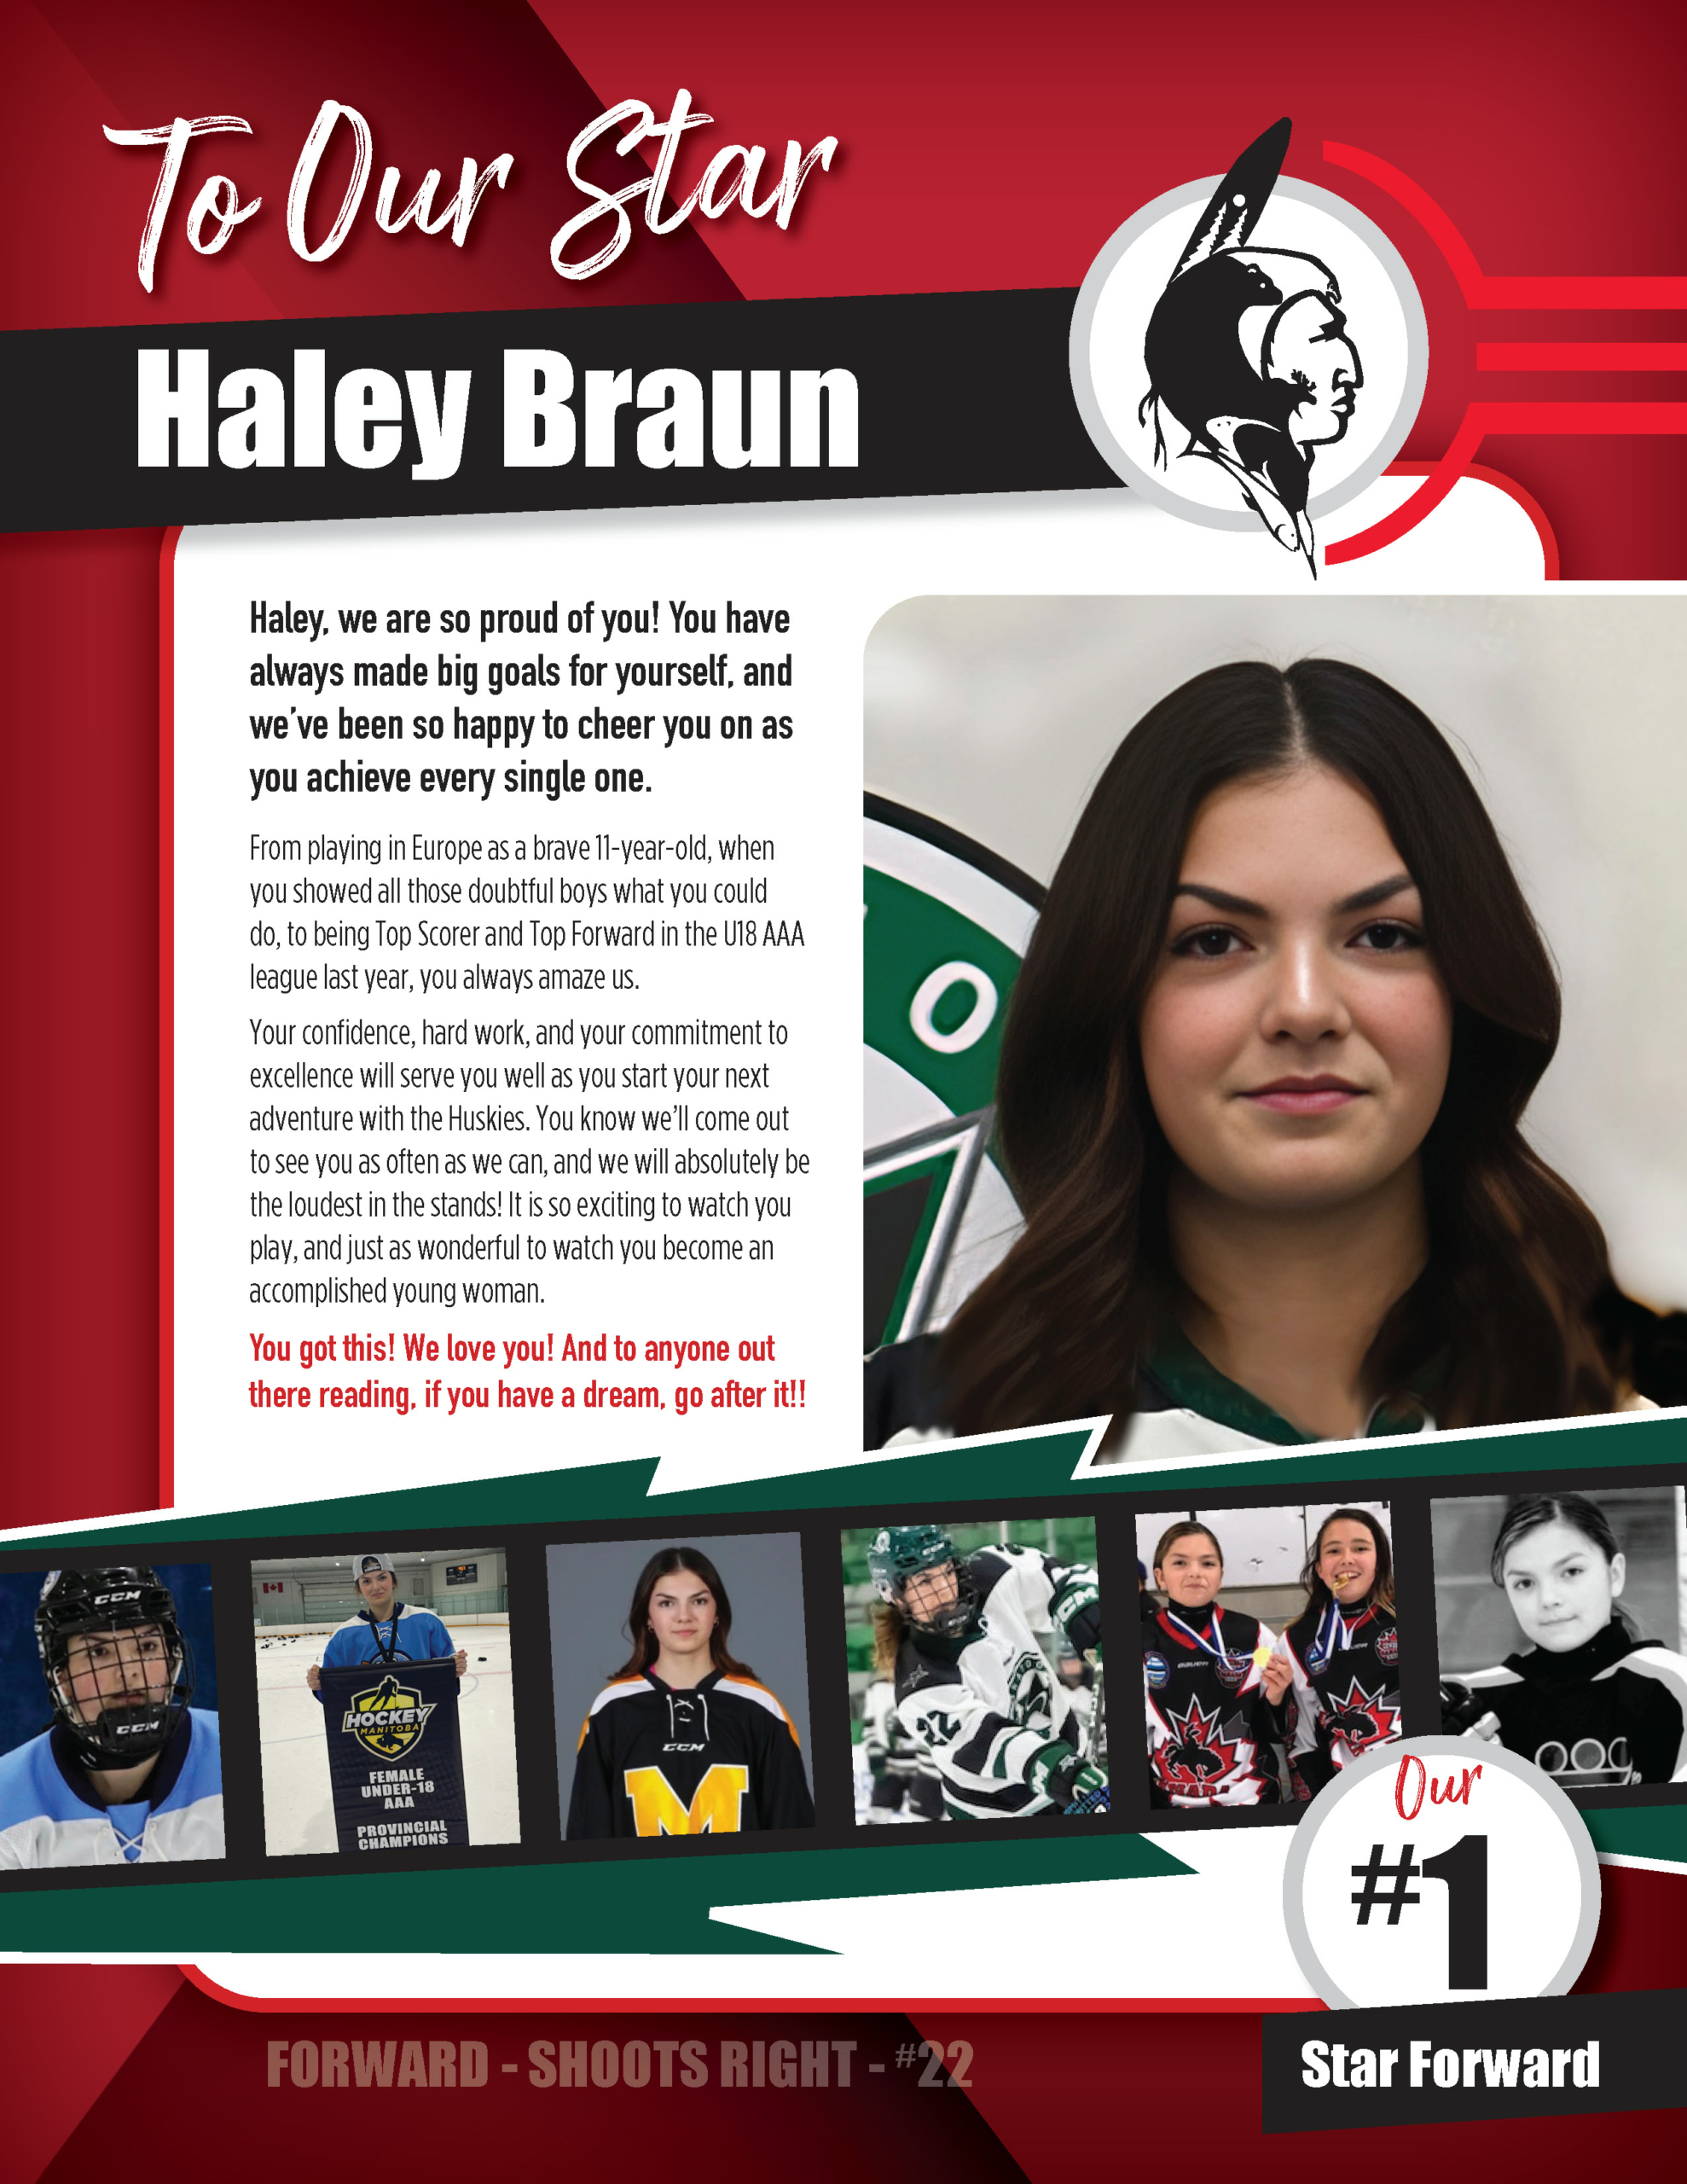 To Our Star - Haley Braun